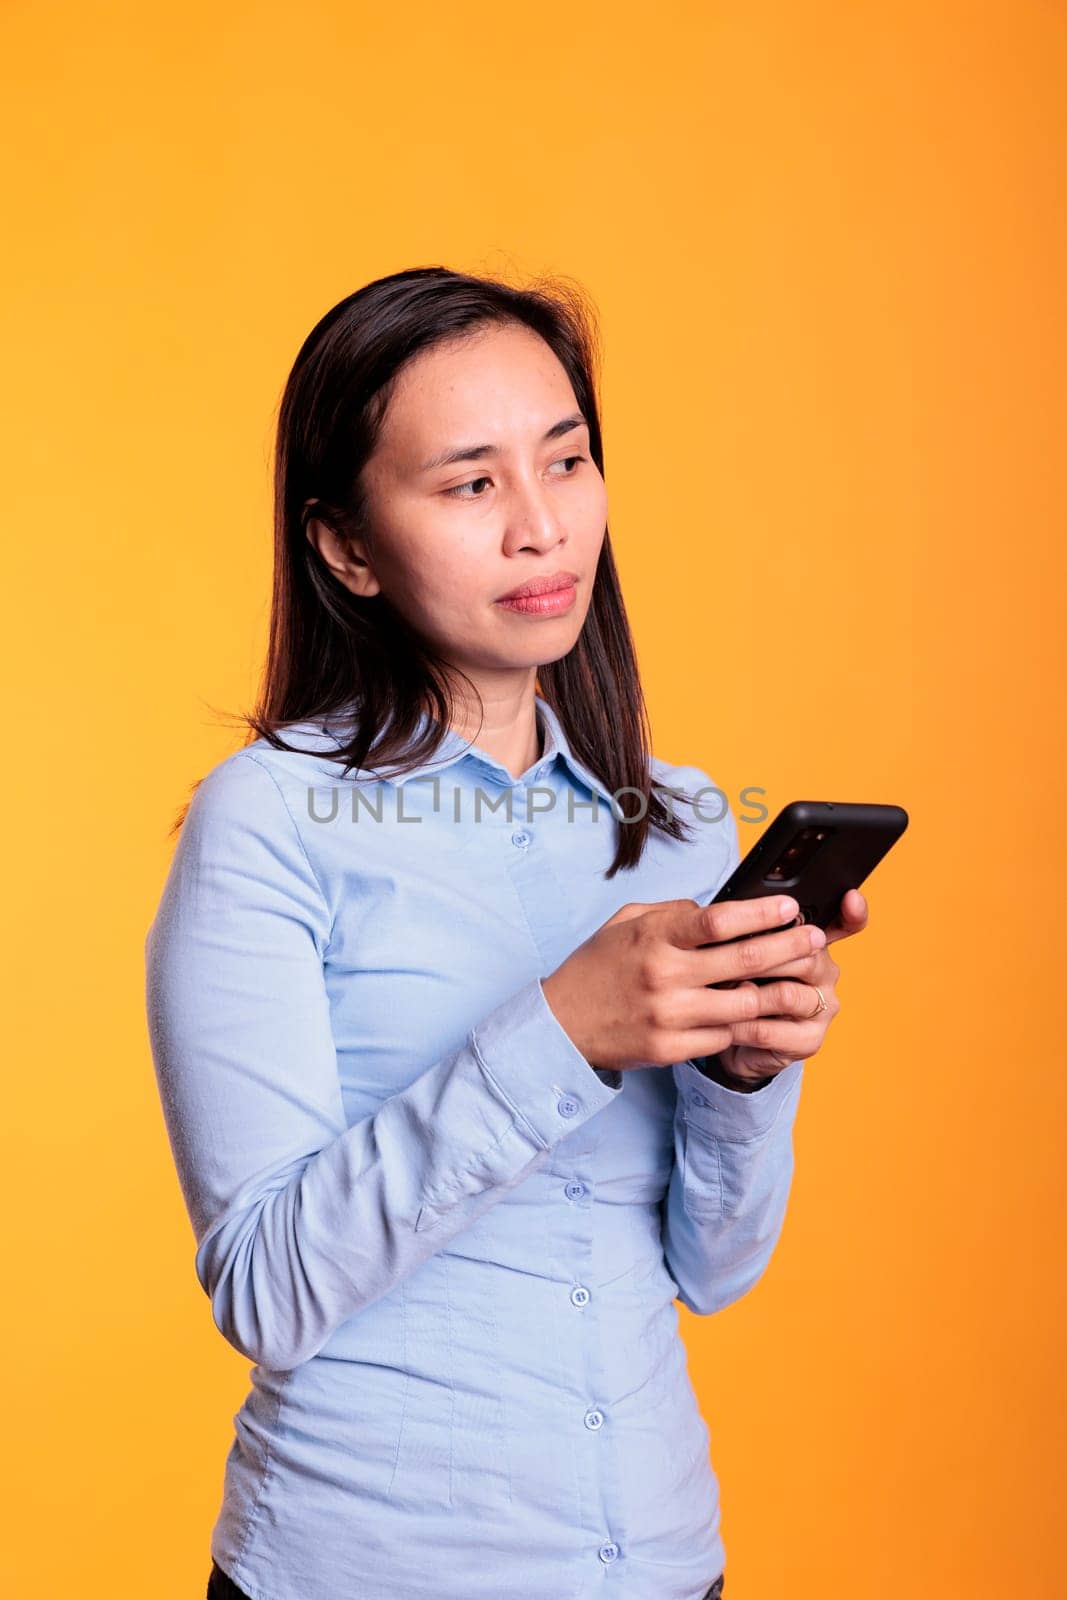 Pensive woman typing message on mobile phone by DCStudio